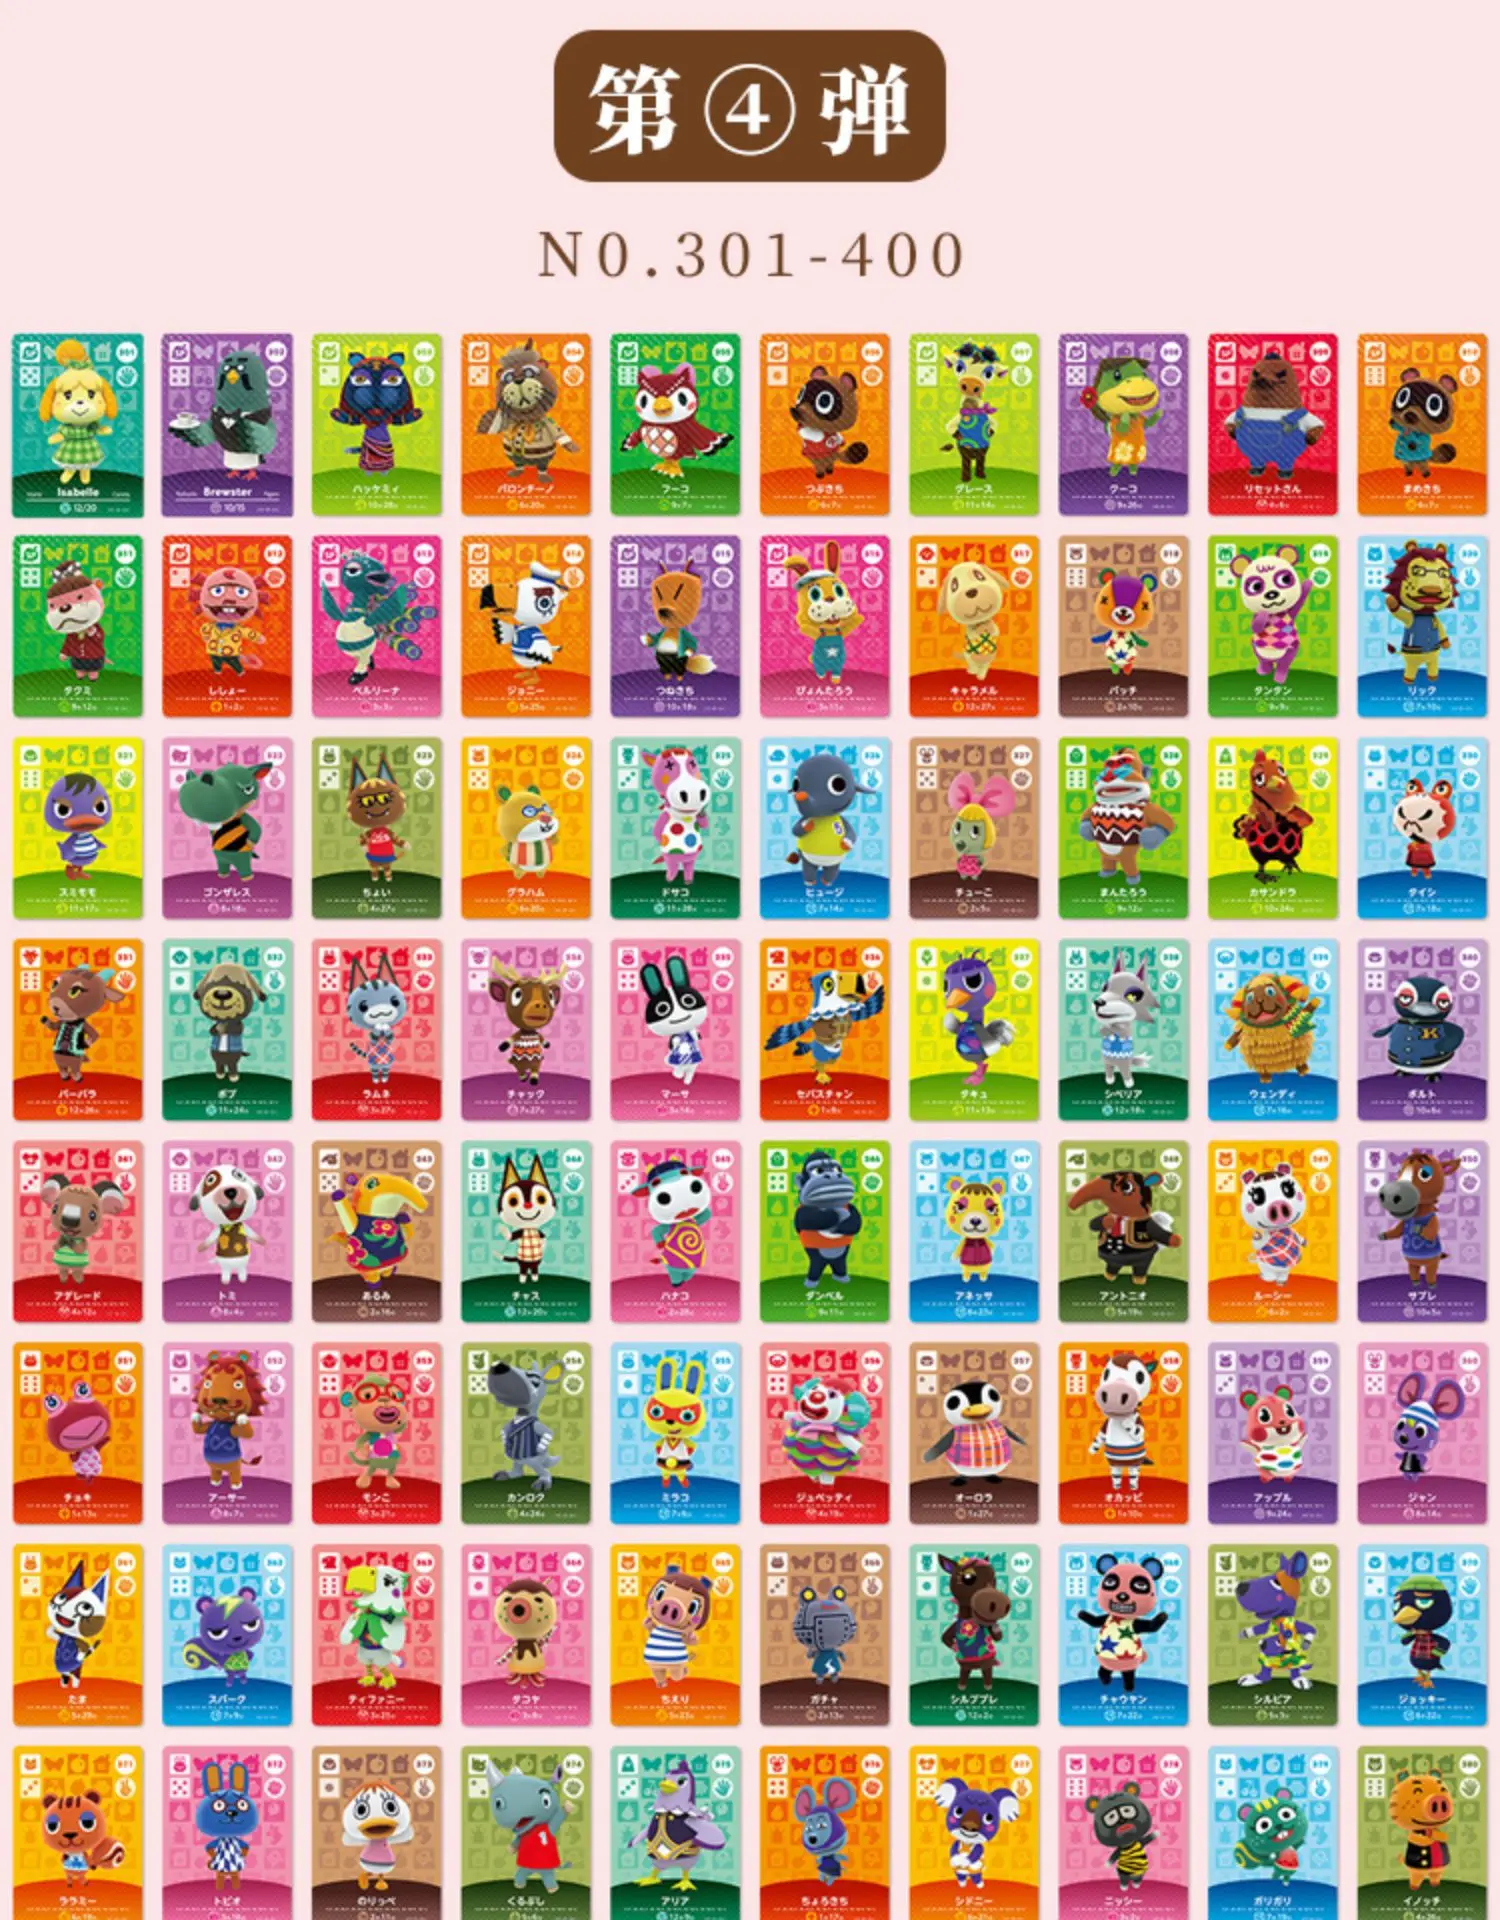 

100pcs Mini Series Animal Crossing Card Work for NS 3DS Game New Horizons Ankha Freya Kid Cat Villager Card 20*30mm